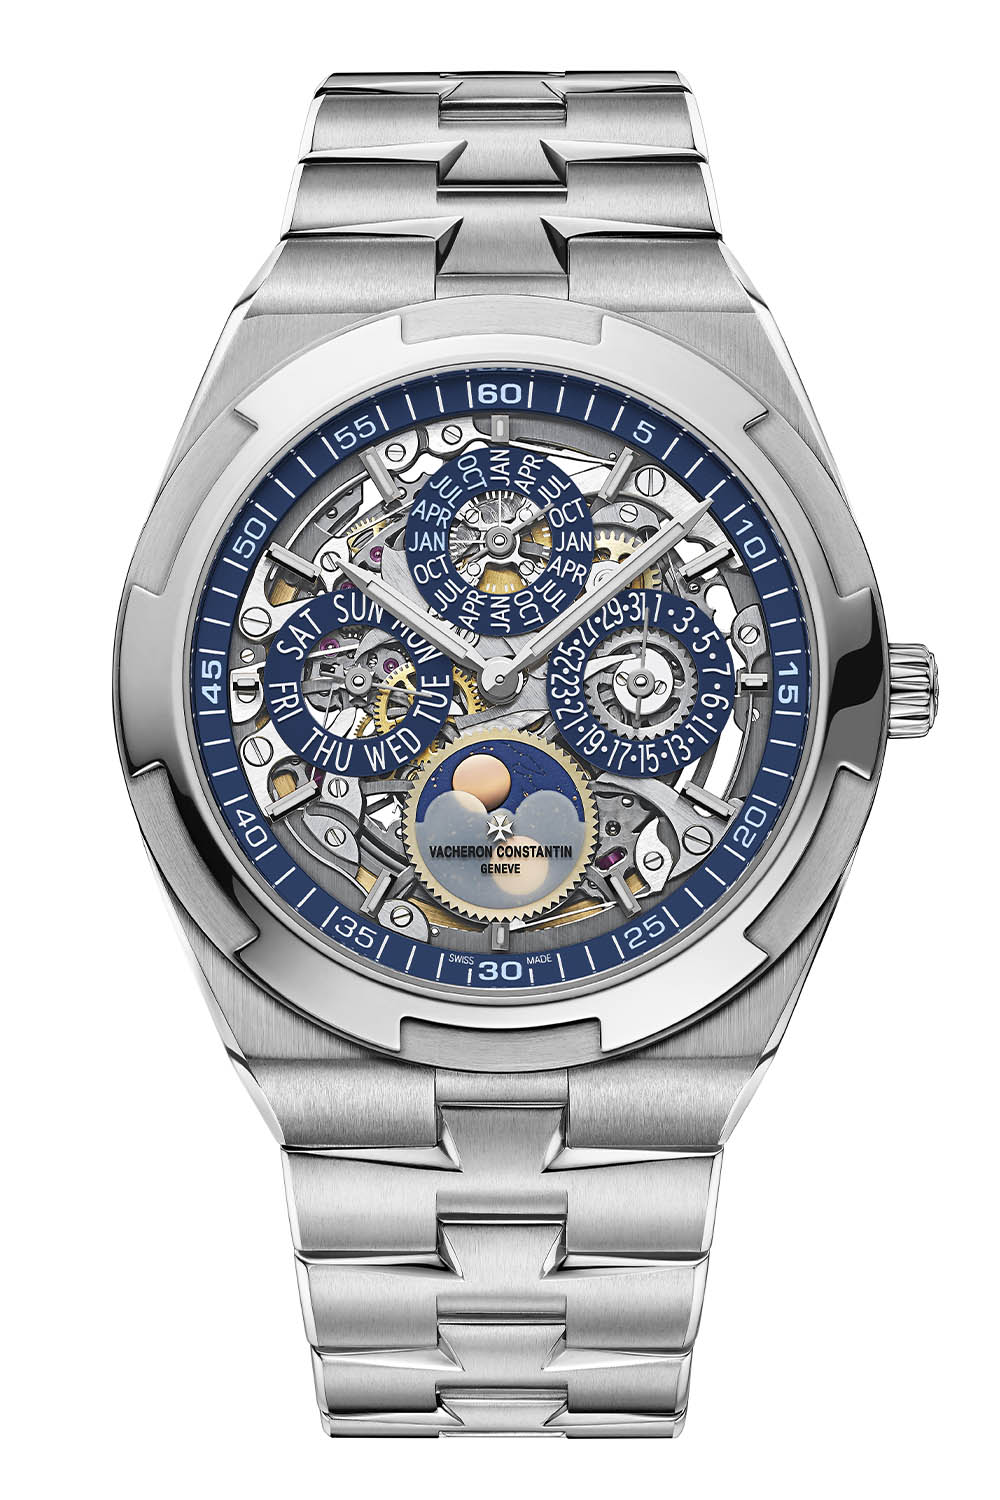 New Editions of the Vacheron Constantin Overseas Perpetual Calendar Ultra-Thin in White Gold 2021 - 8